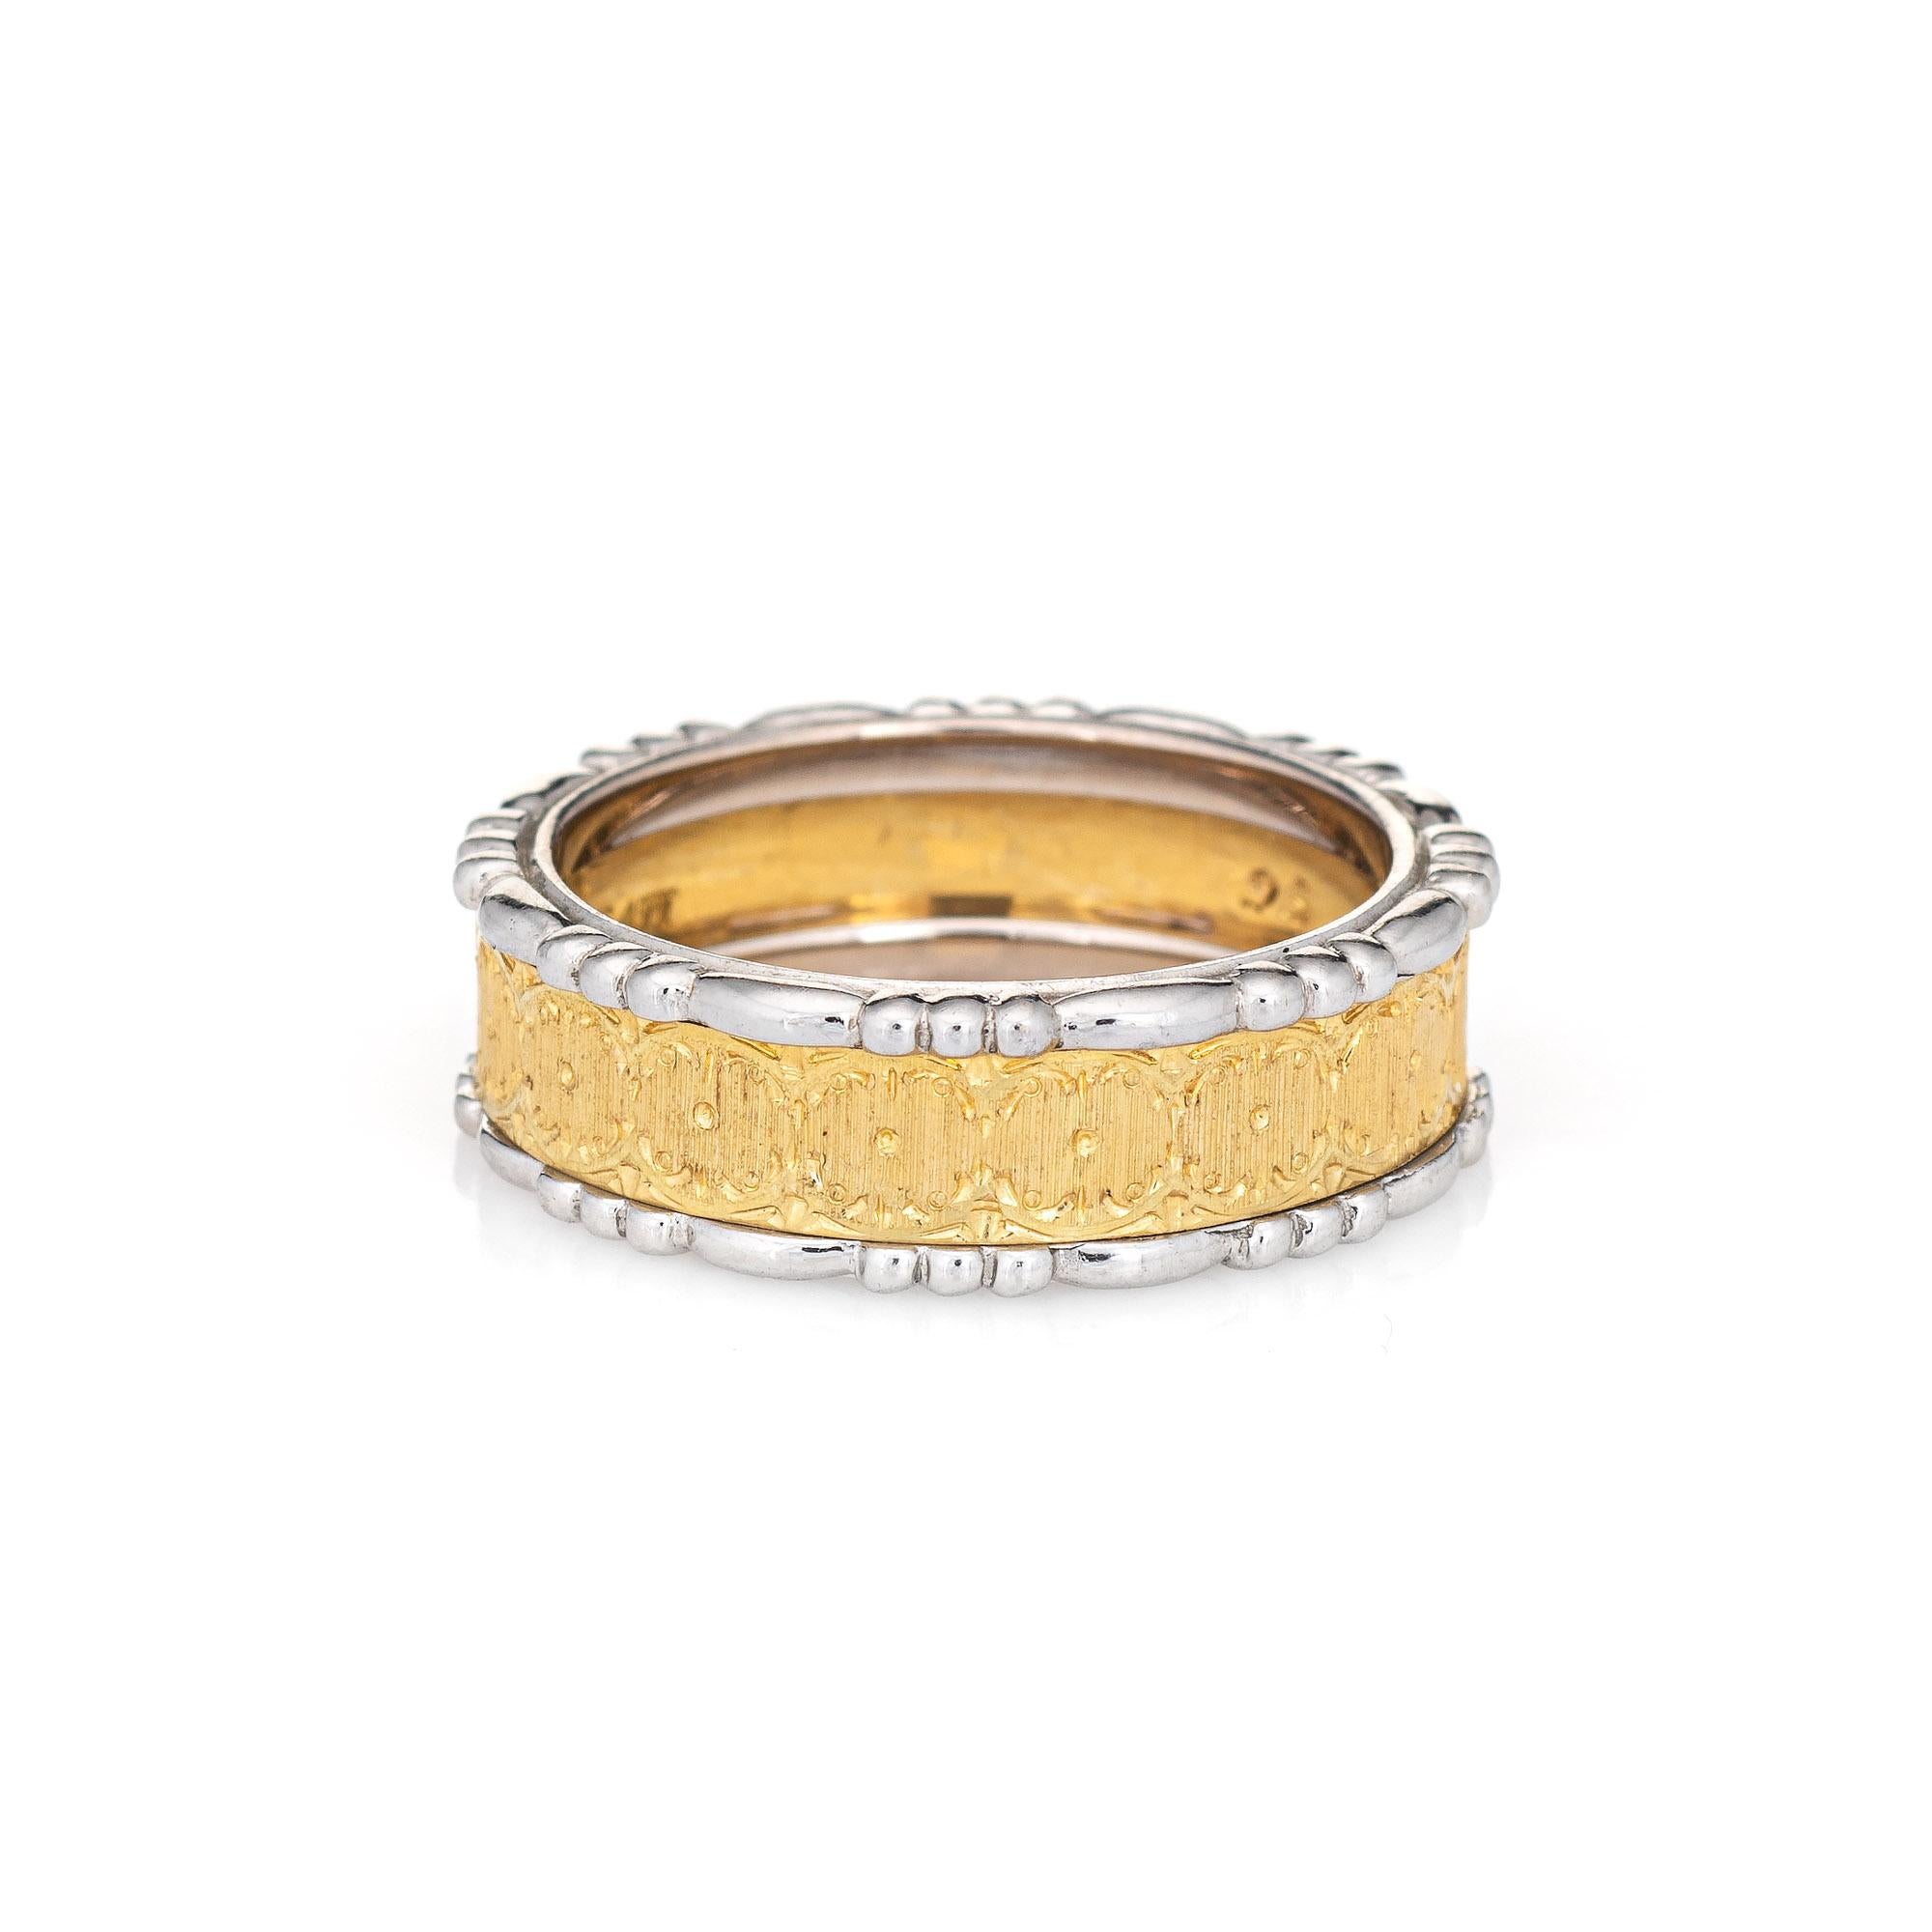 Estate Buccellati Prestigio textured band crafted in 18k yellow & white gold.  

The band features hand engraved textured gold detail to the yellow gold portion of the band, a distinct hallmark of Buccellati jewelry, with scalloped white gold detail